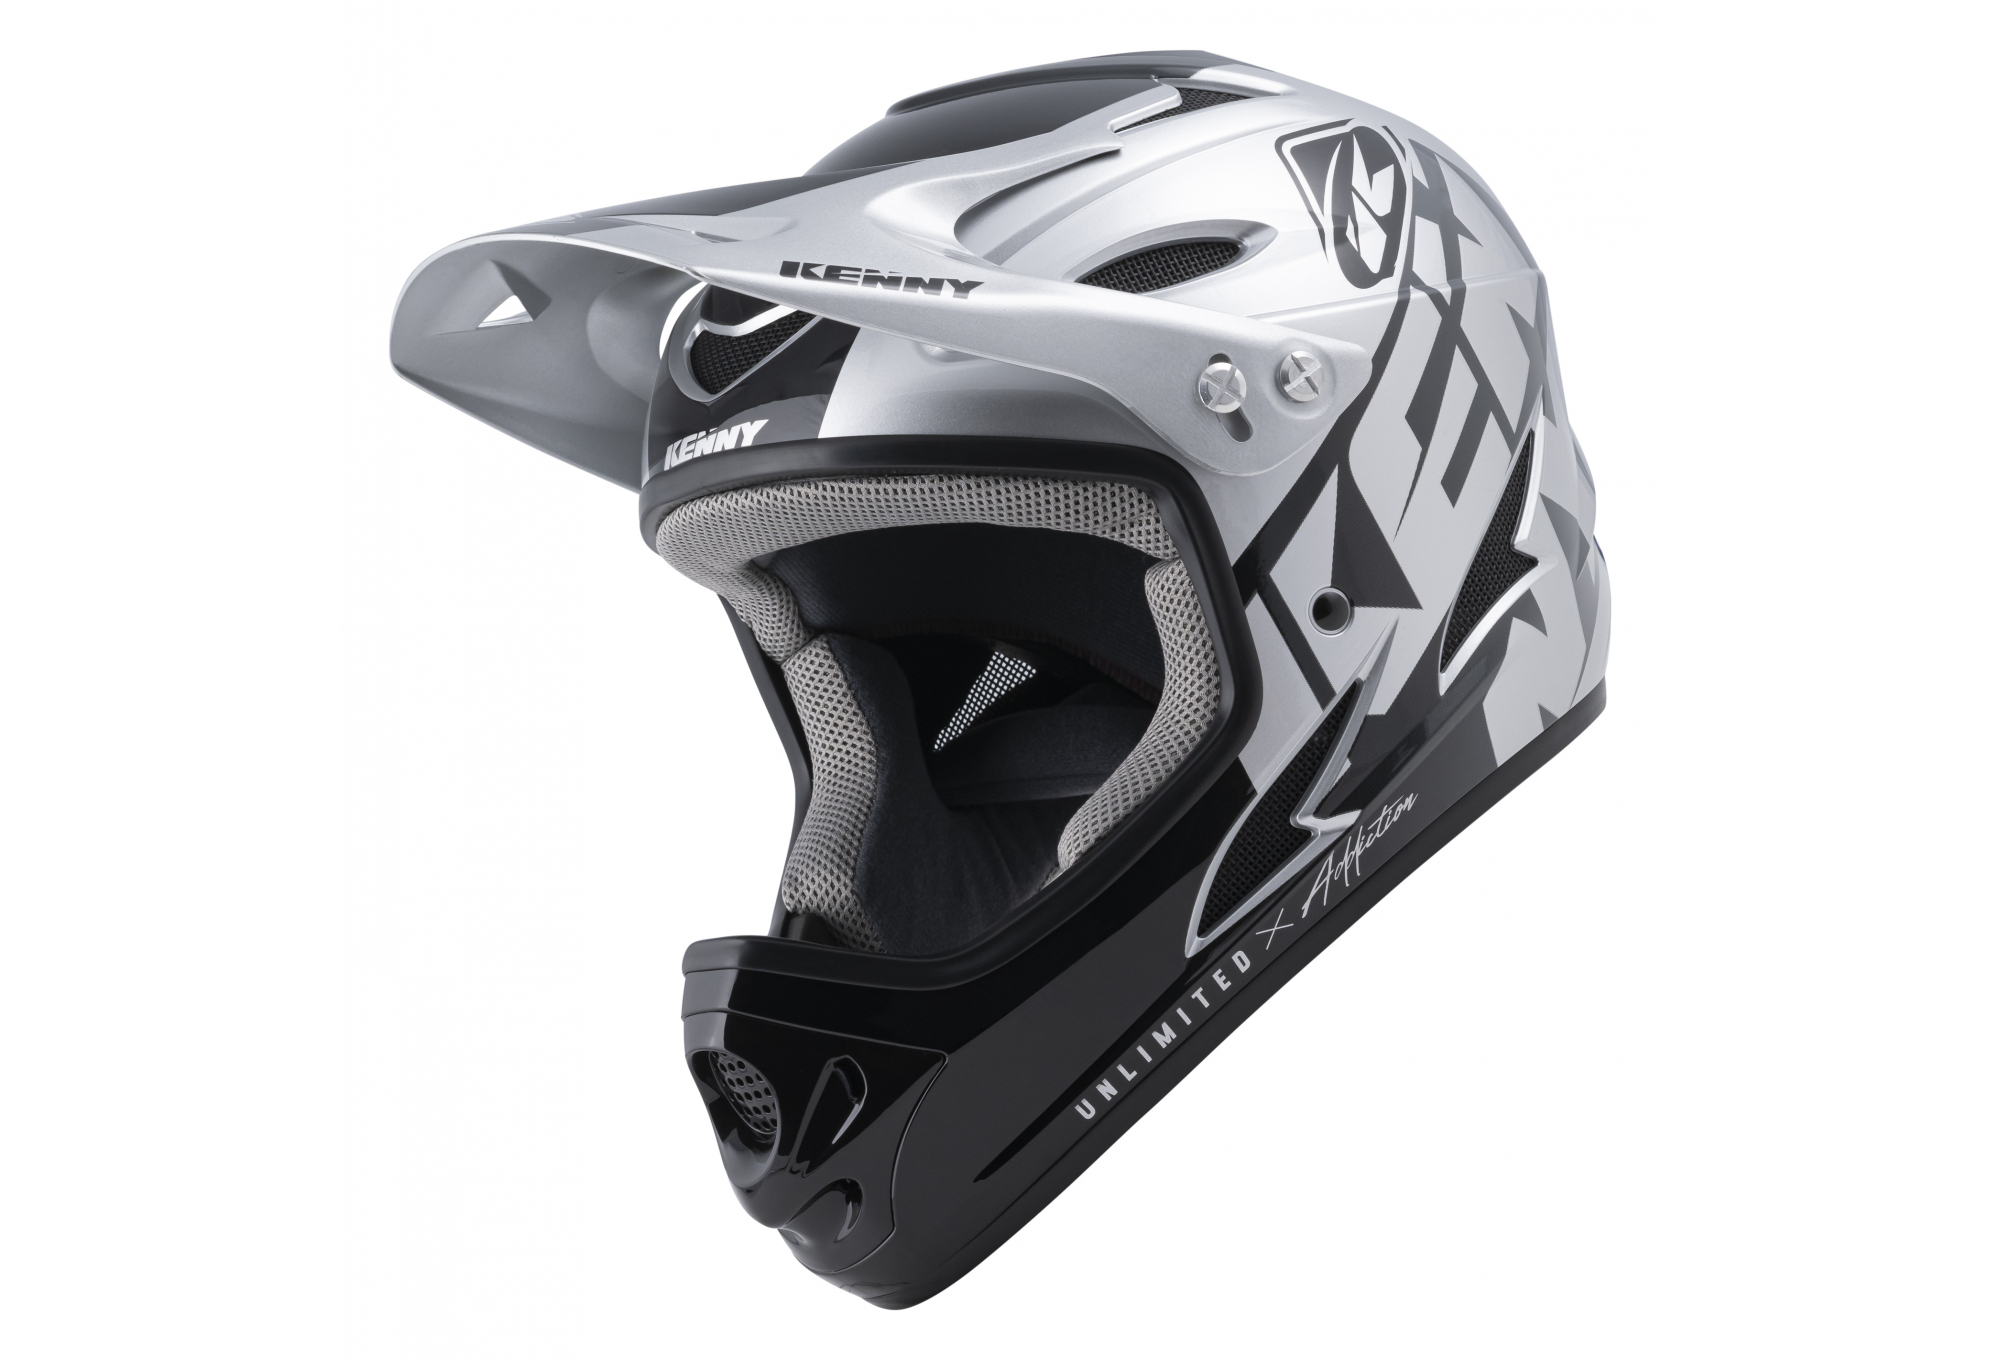 CASQUE INTÉGRAL KENNY DOWN HILL 2022 Gris - Giant Store